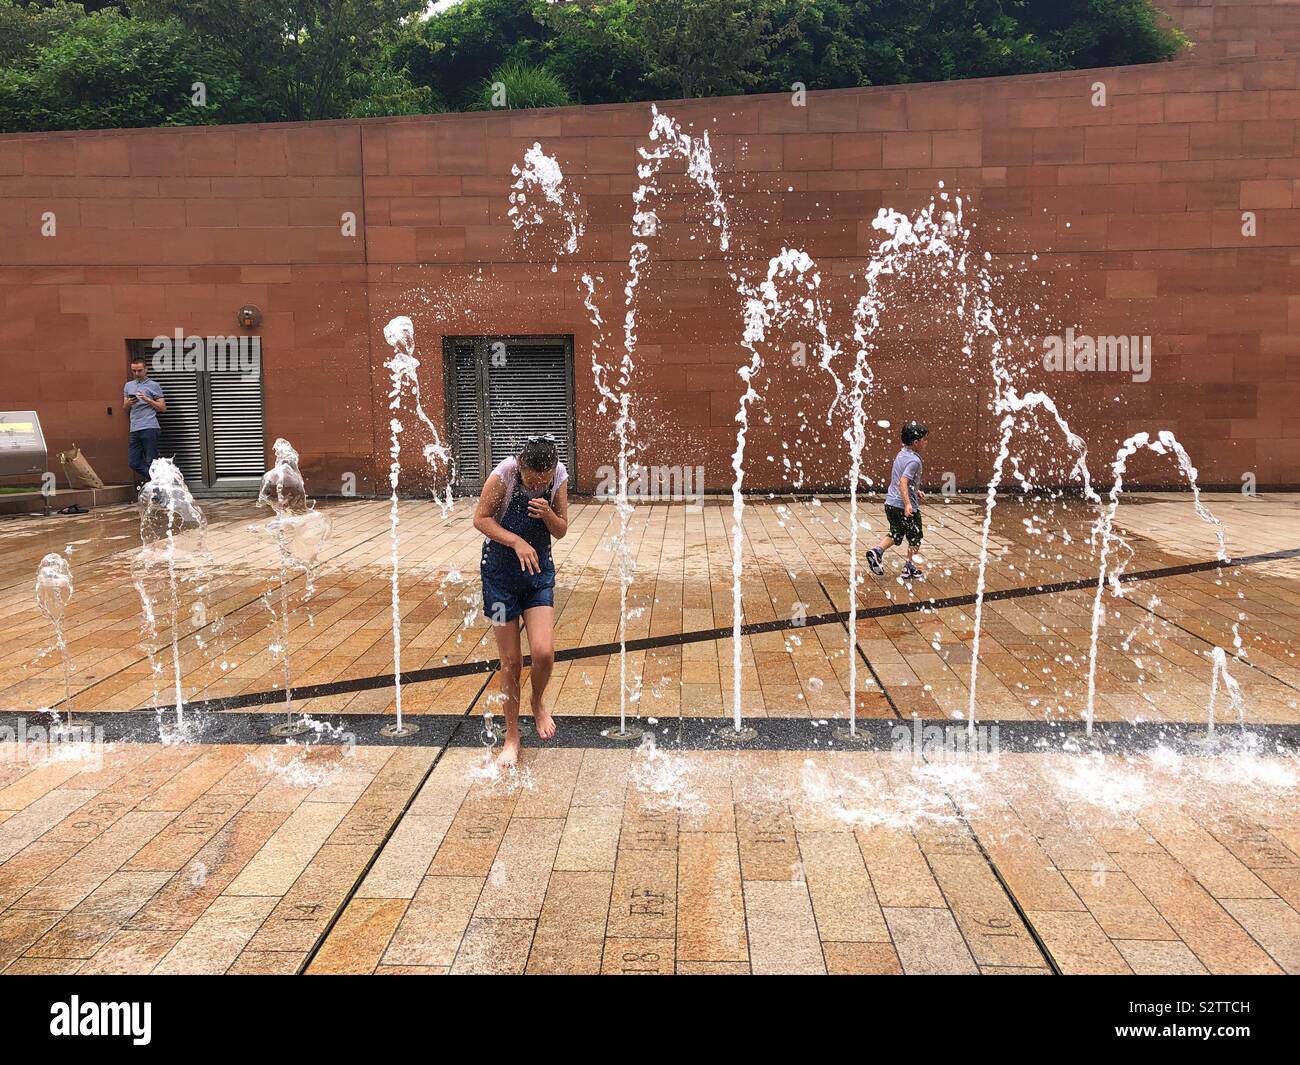 Children playing in water fountains on a hot summers day. Stock Photo